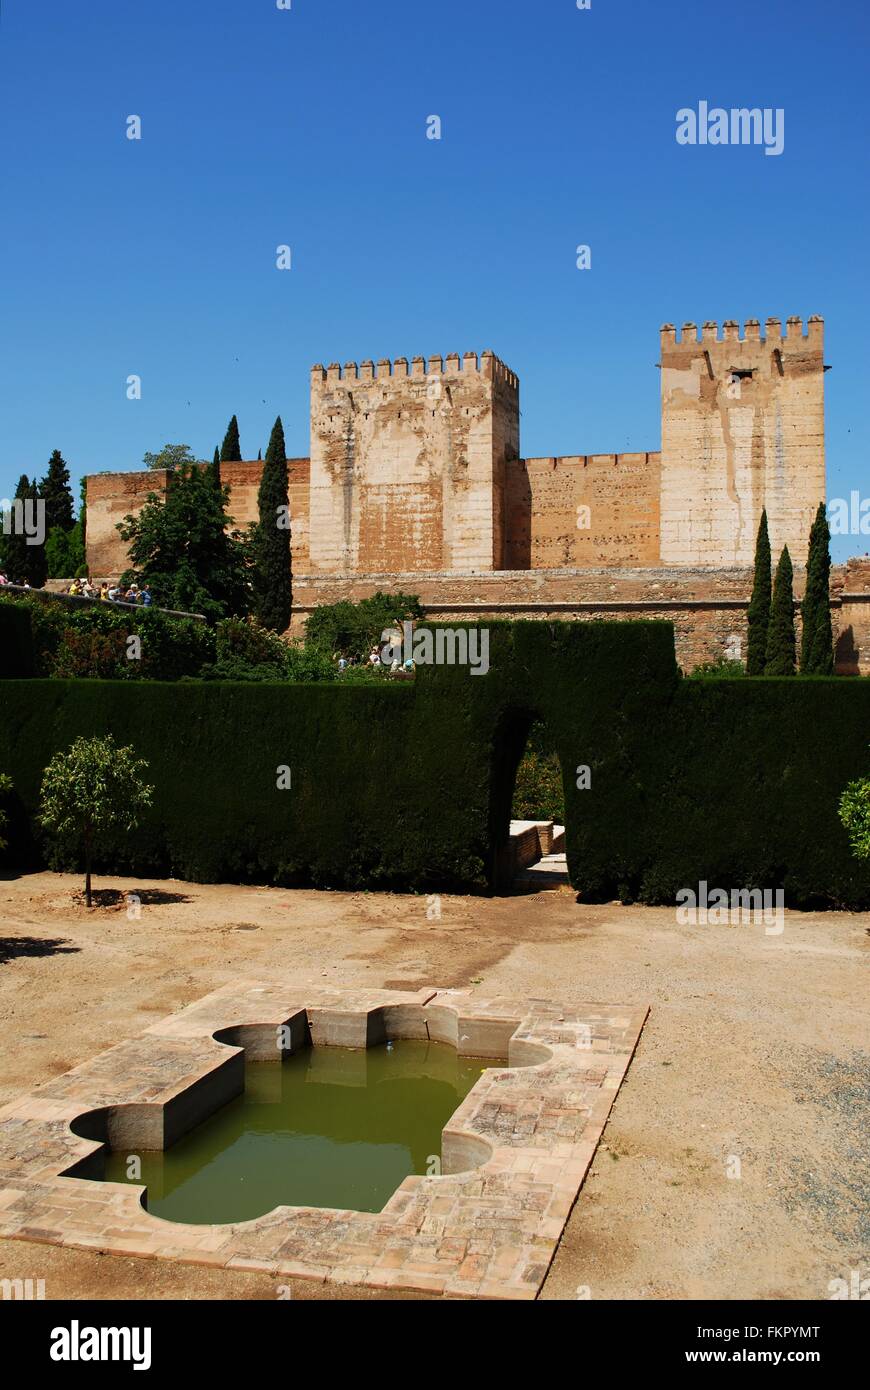 Cistern court featuring Torre Quebrada and Torre del Homenaje castle towers, Alhambra Palace, Granada, Spain. Stock Photo